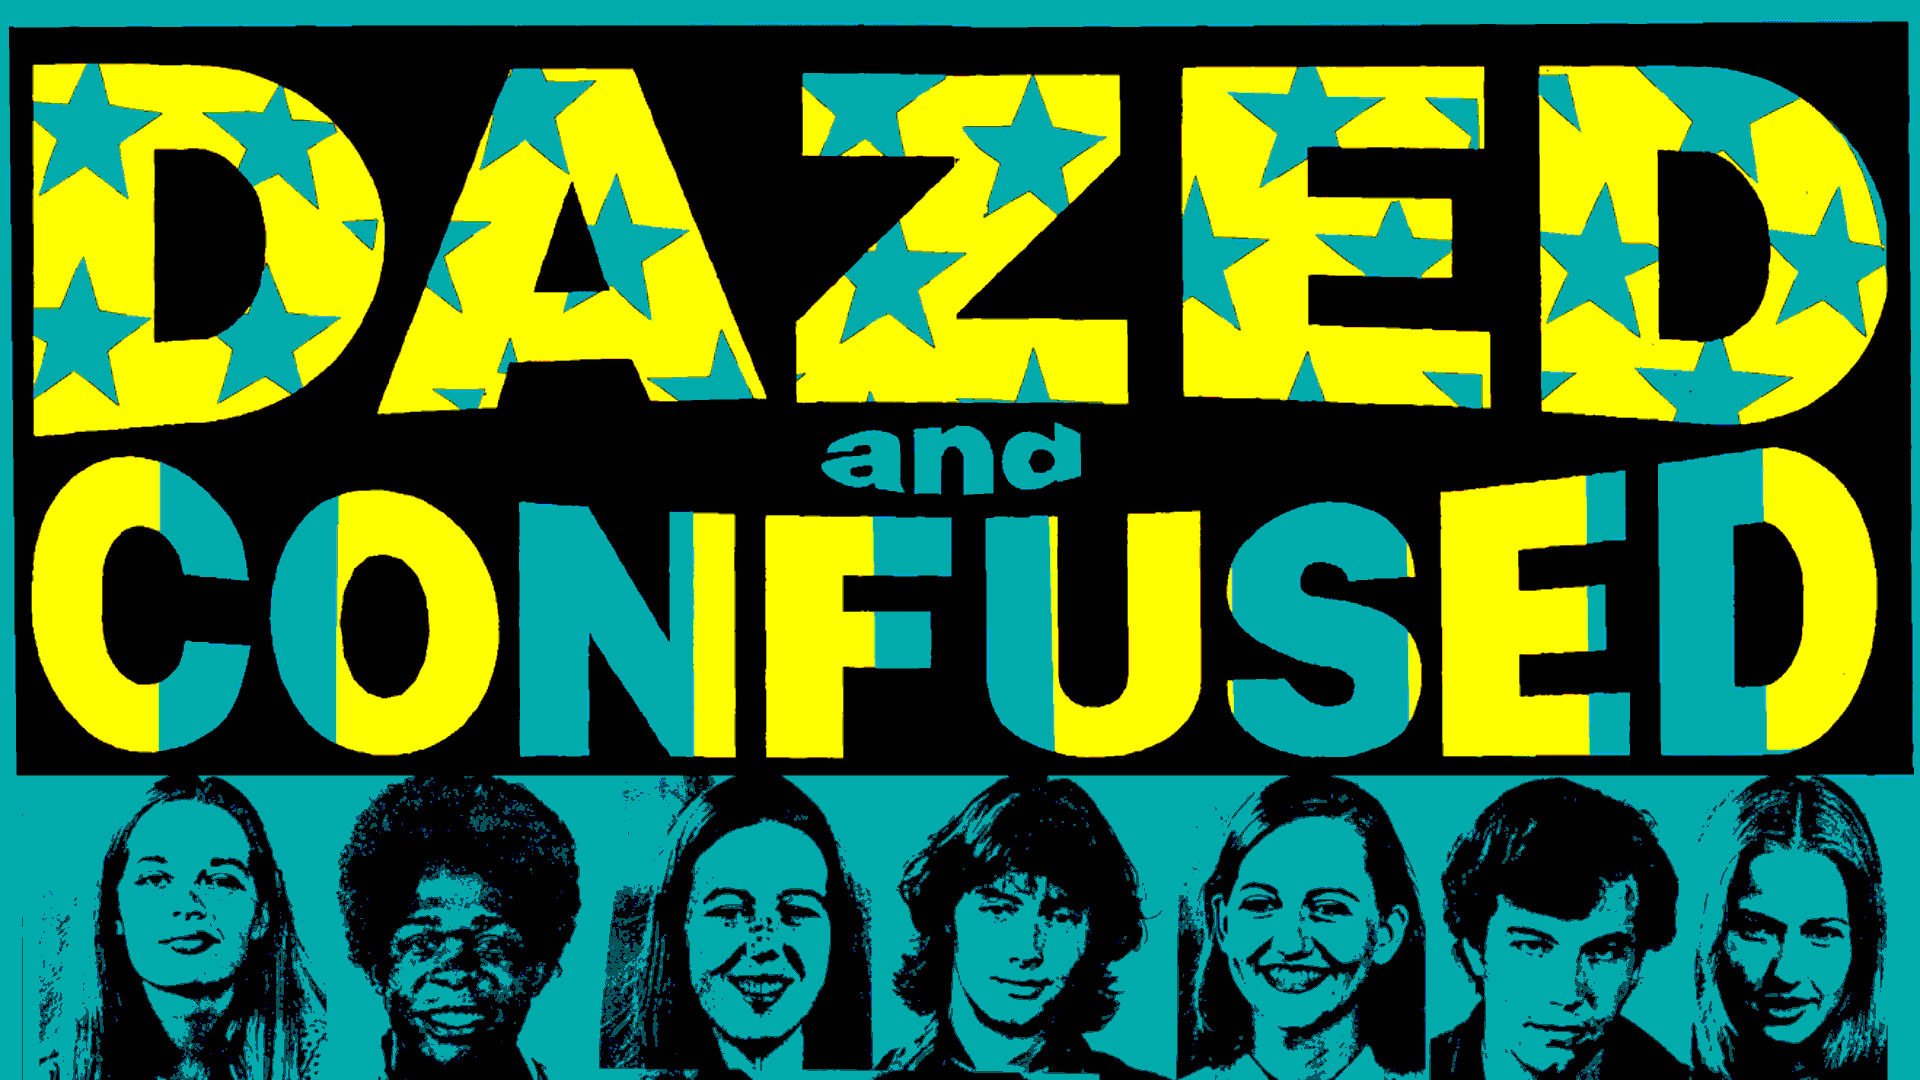 dazed and confused, Comedy, Dazed, Confused Wallpaper